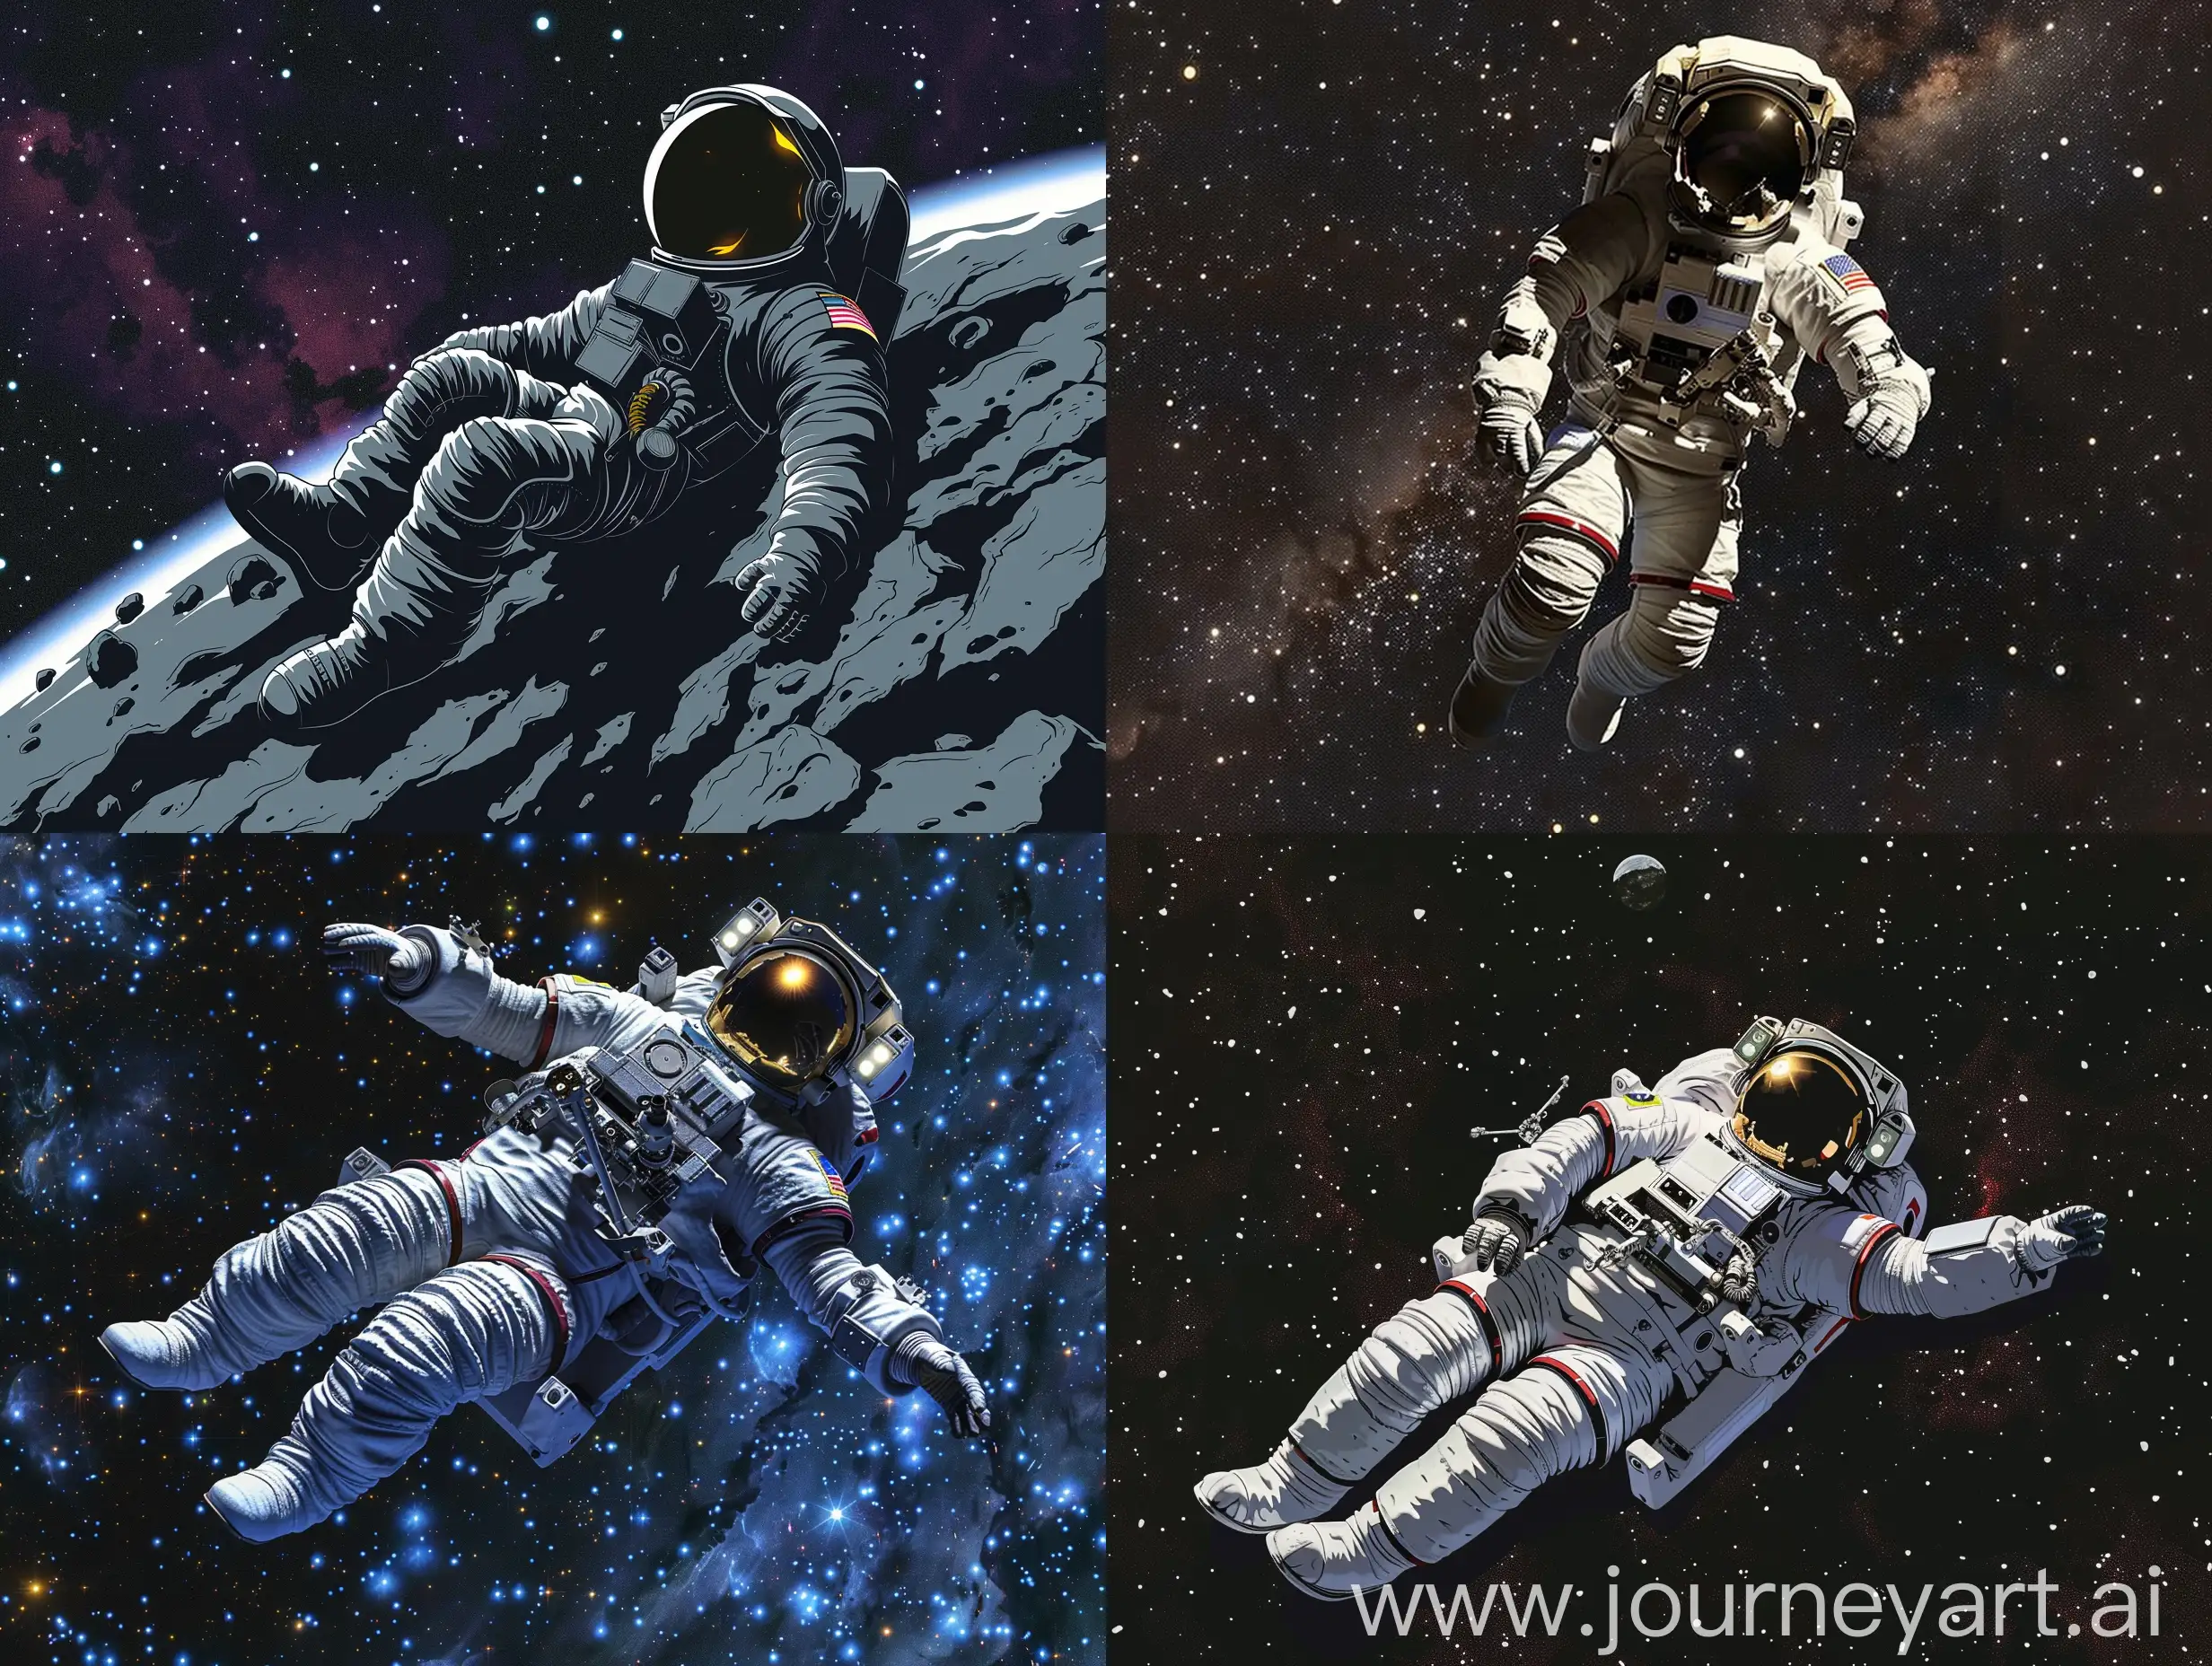 Lonely-Astronaut-Adrift-in-the-Vastness-of-Space